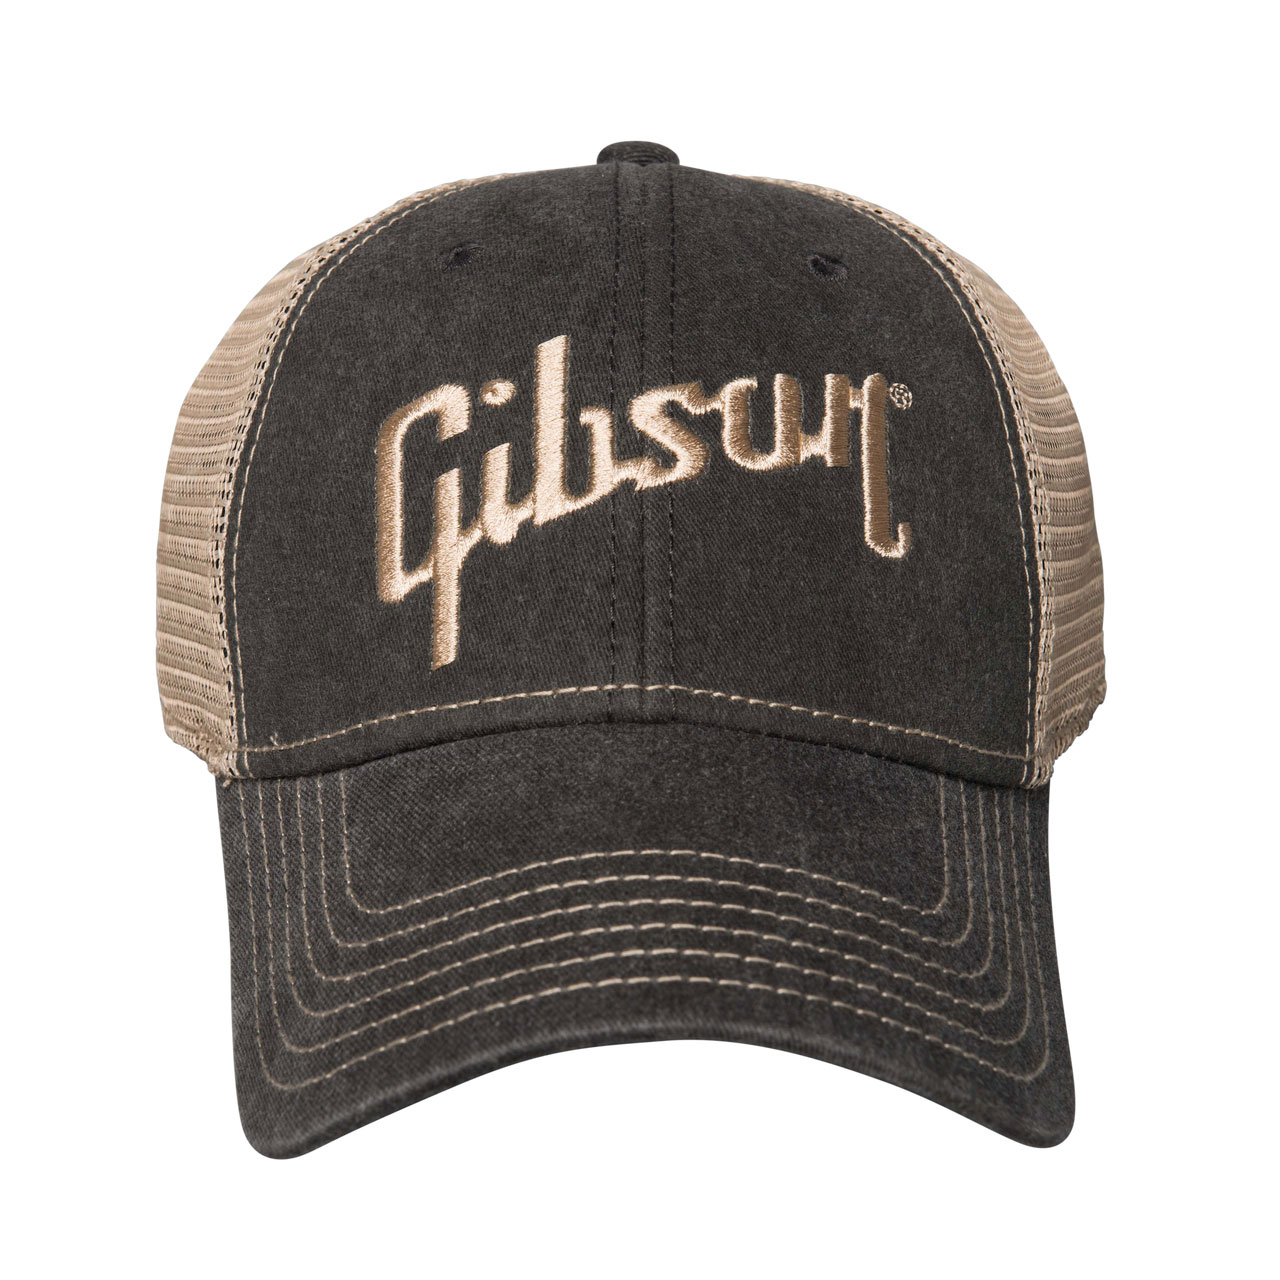 GIBSON ACCESSORIES LIFESTYLE CASQUETTES FADED DENIM HAT